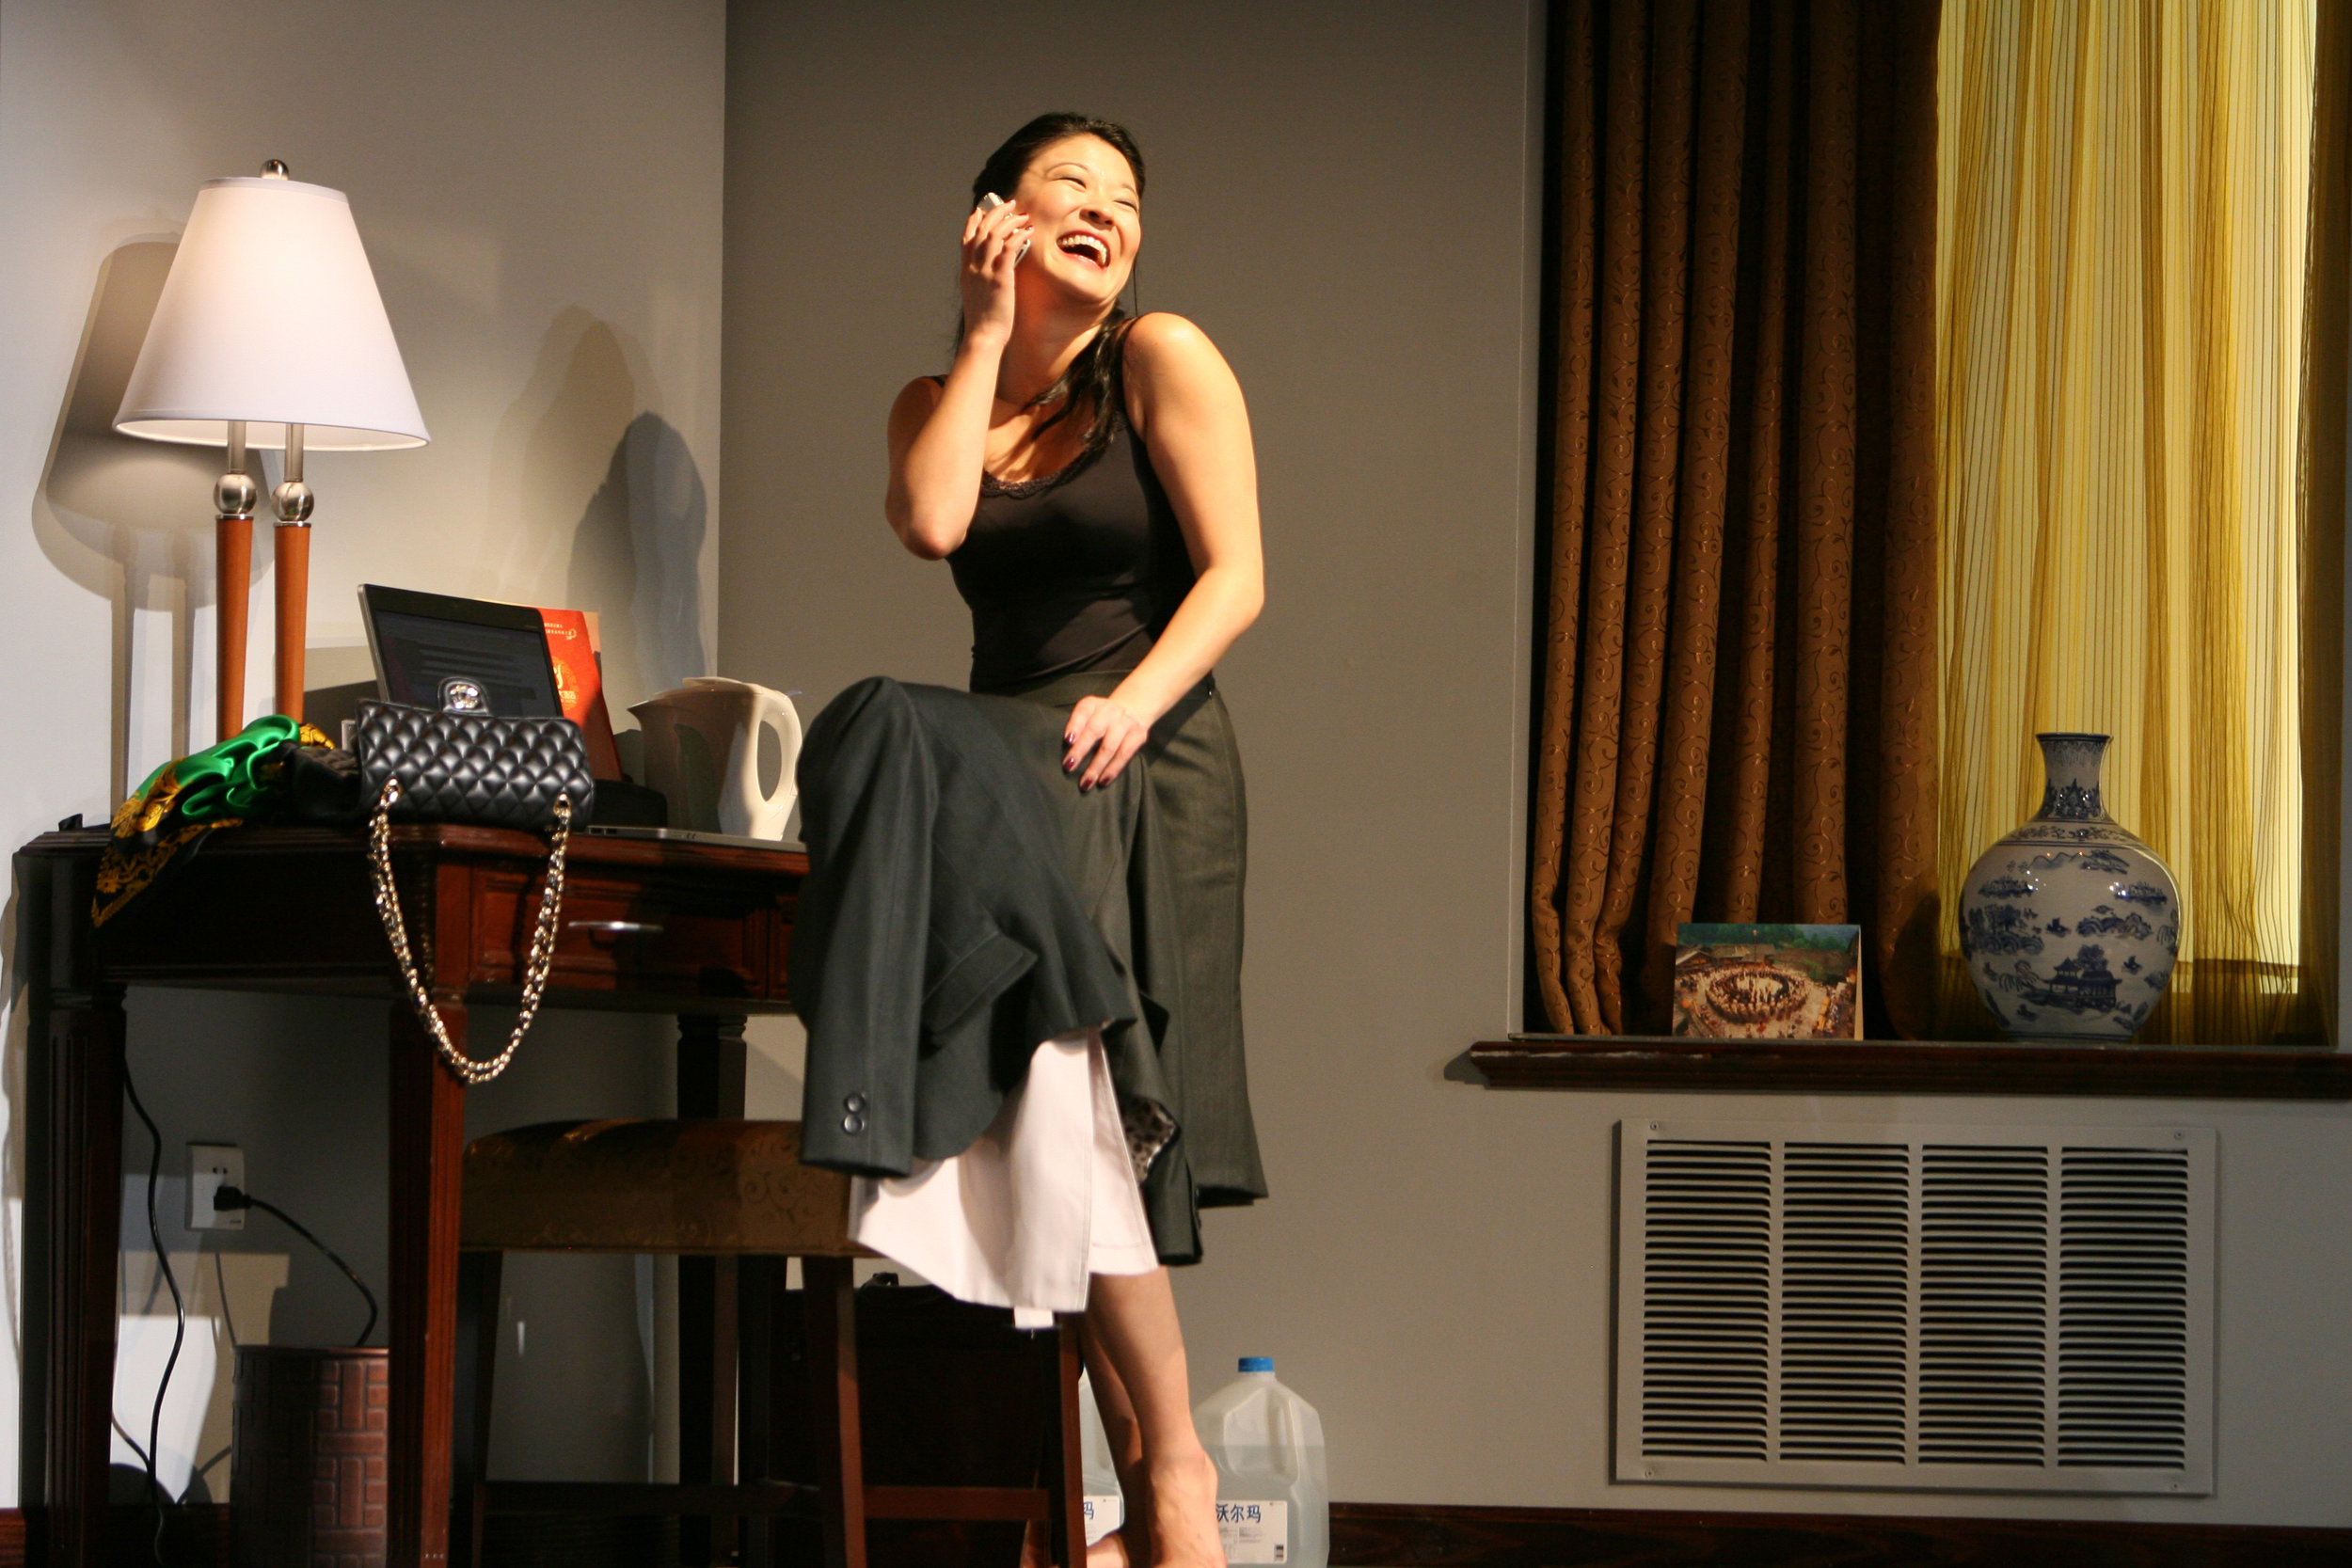 Jennifer Lim. Photo by Eric Y. Exit for the Goodman Theatre, 2011